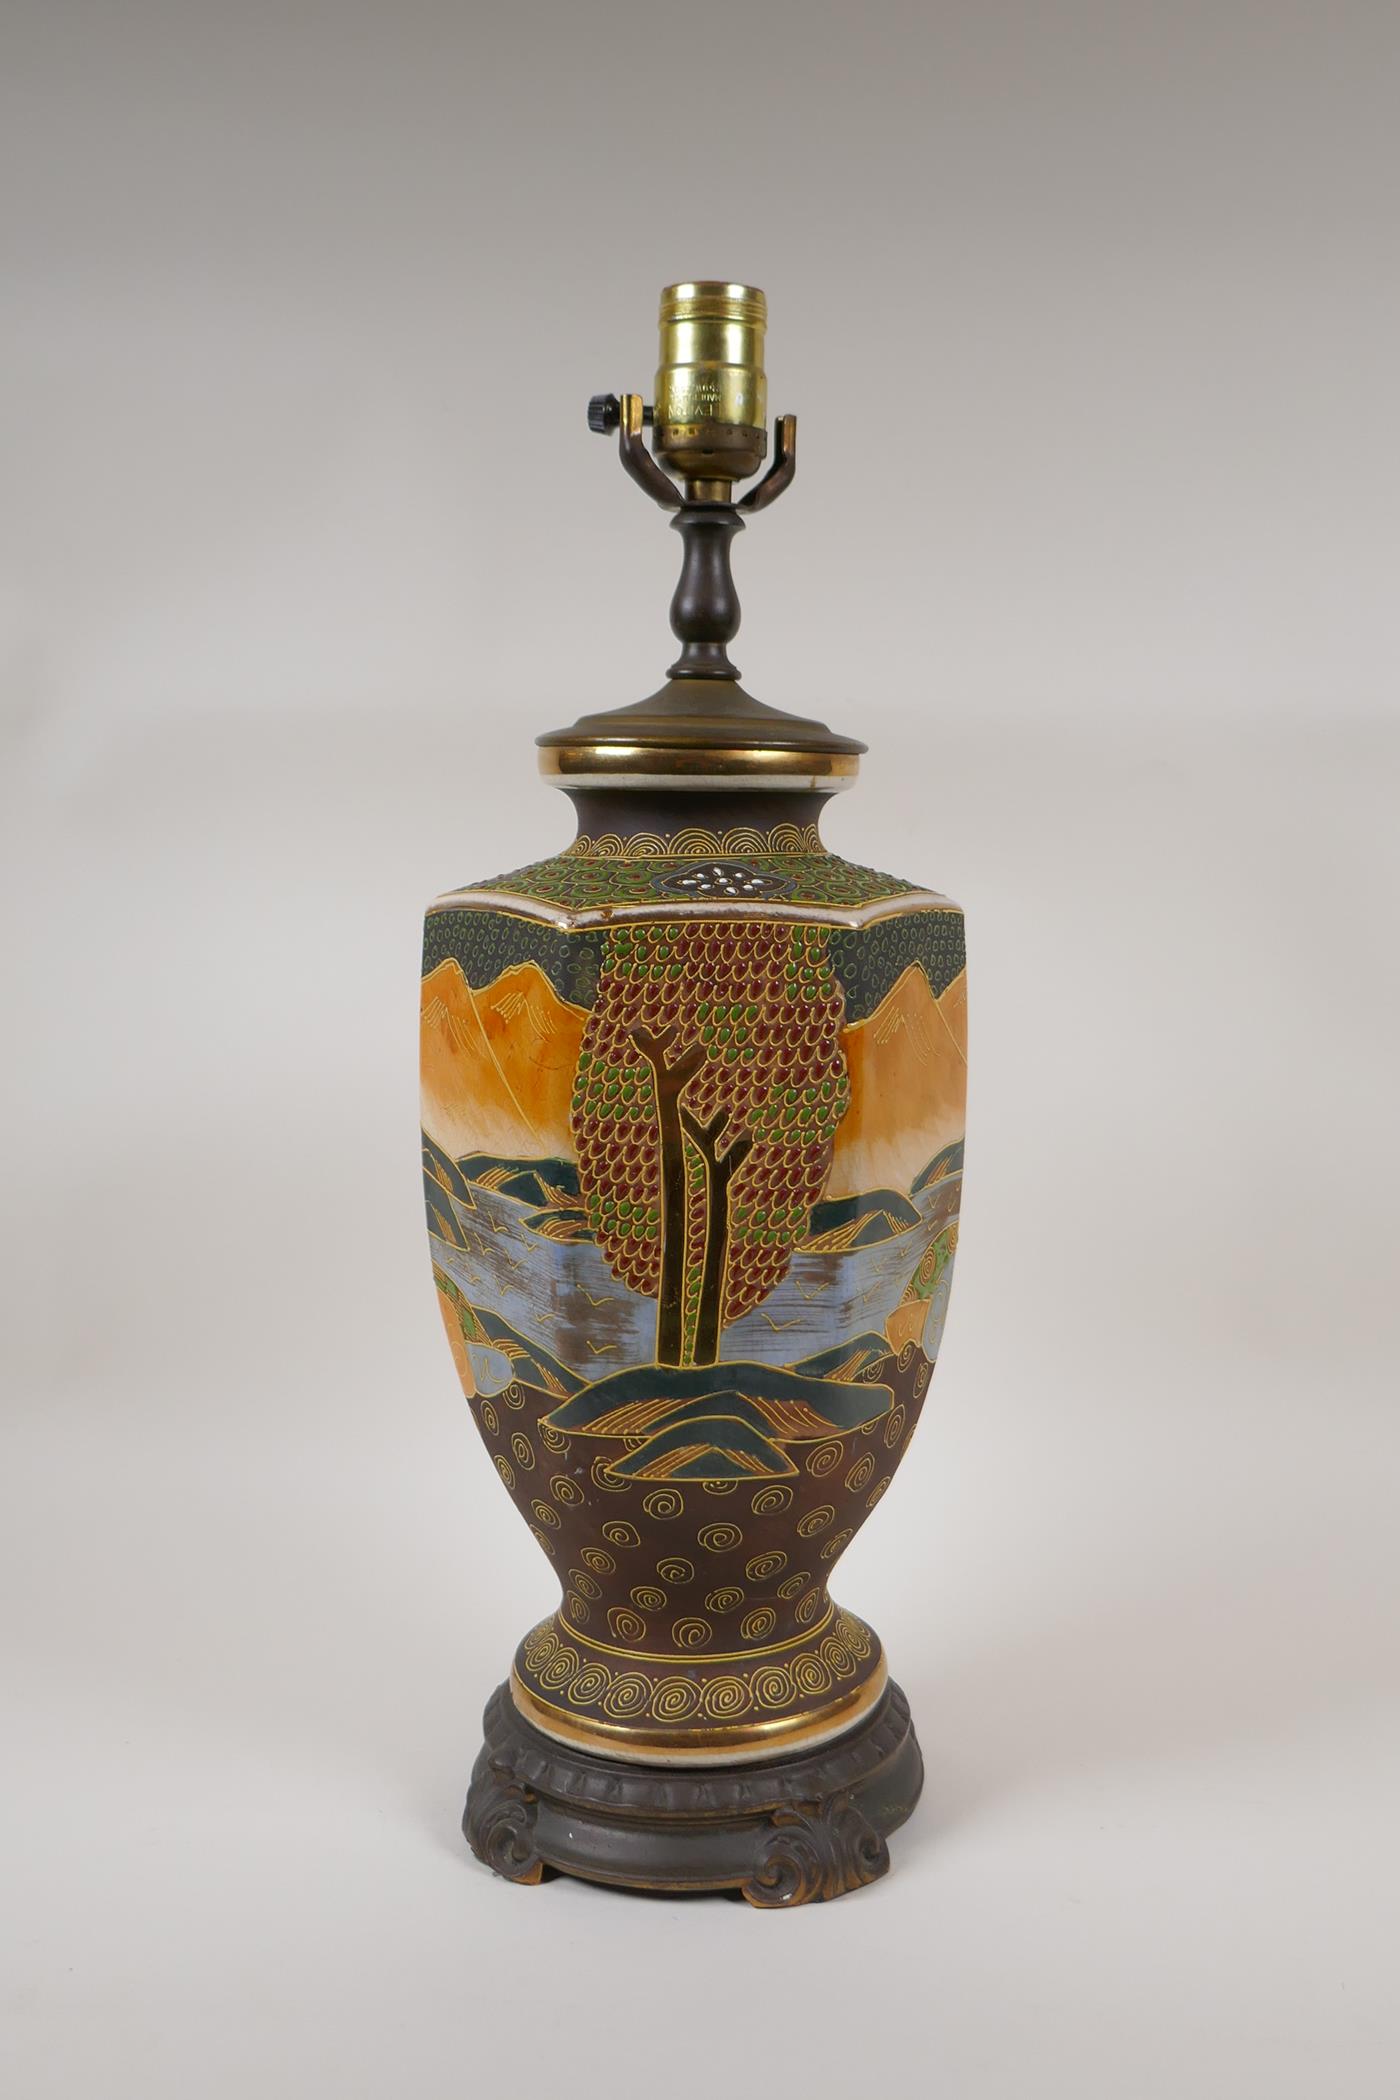 A Japanese Satsuma pottery lamp with figural decoration and bronzed metal mounts, 18½" high - Image 7 of 8